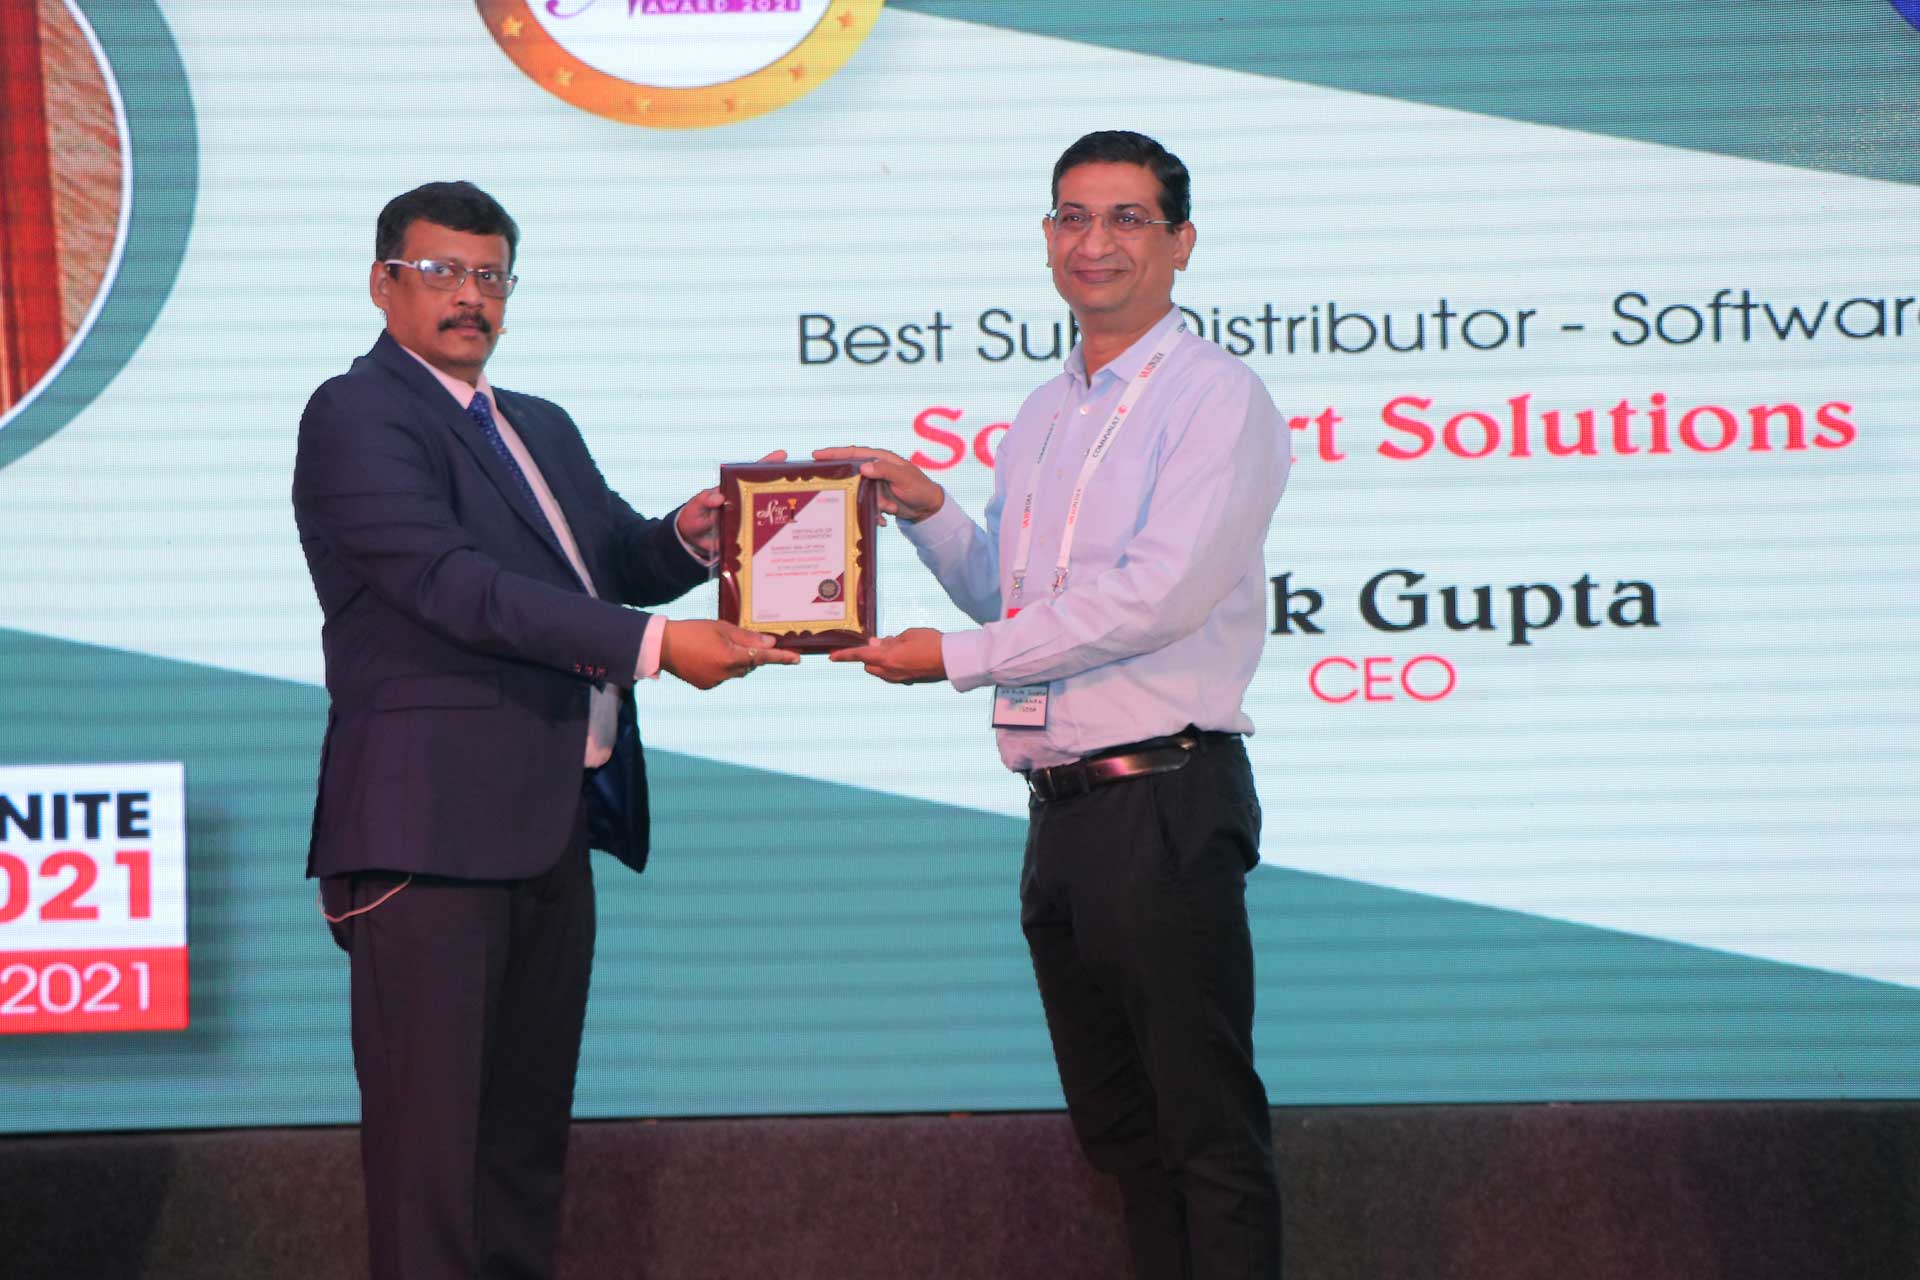 Best Sub-Distributor- Software, Award goes to Softmart Solutions at 20th Star Nite Awards 2021